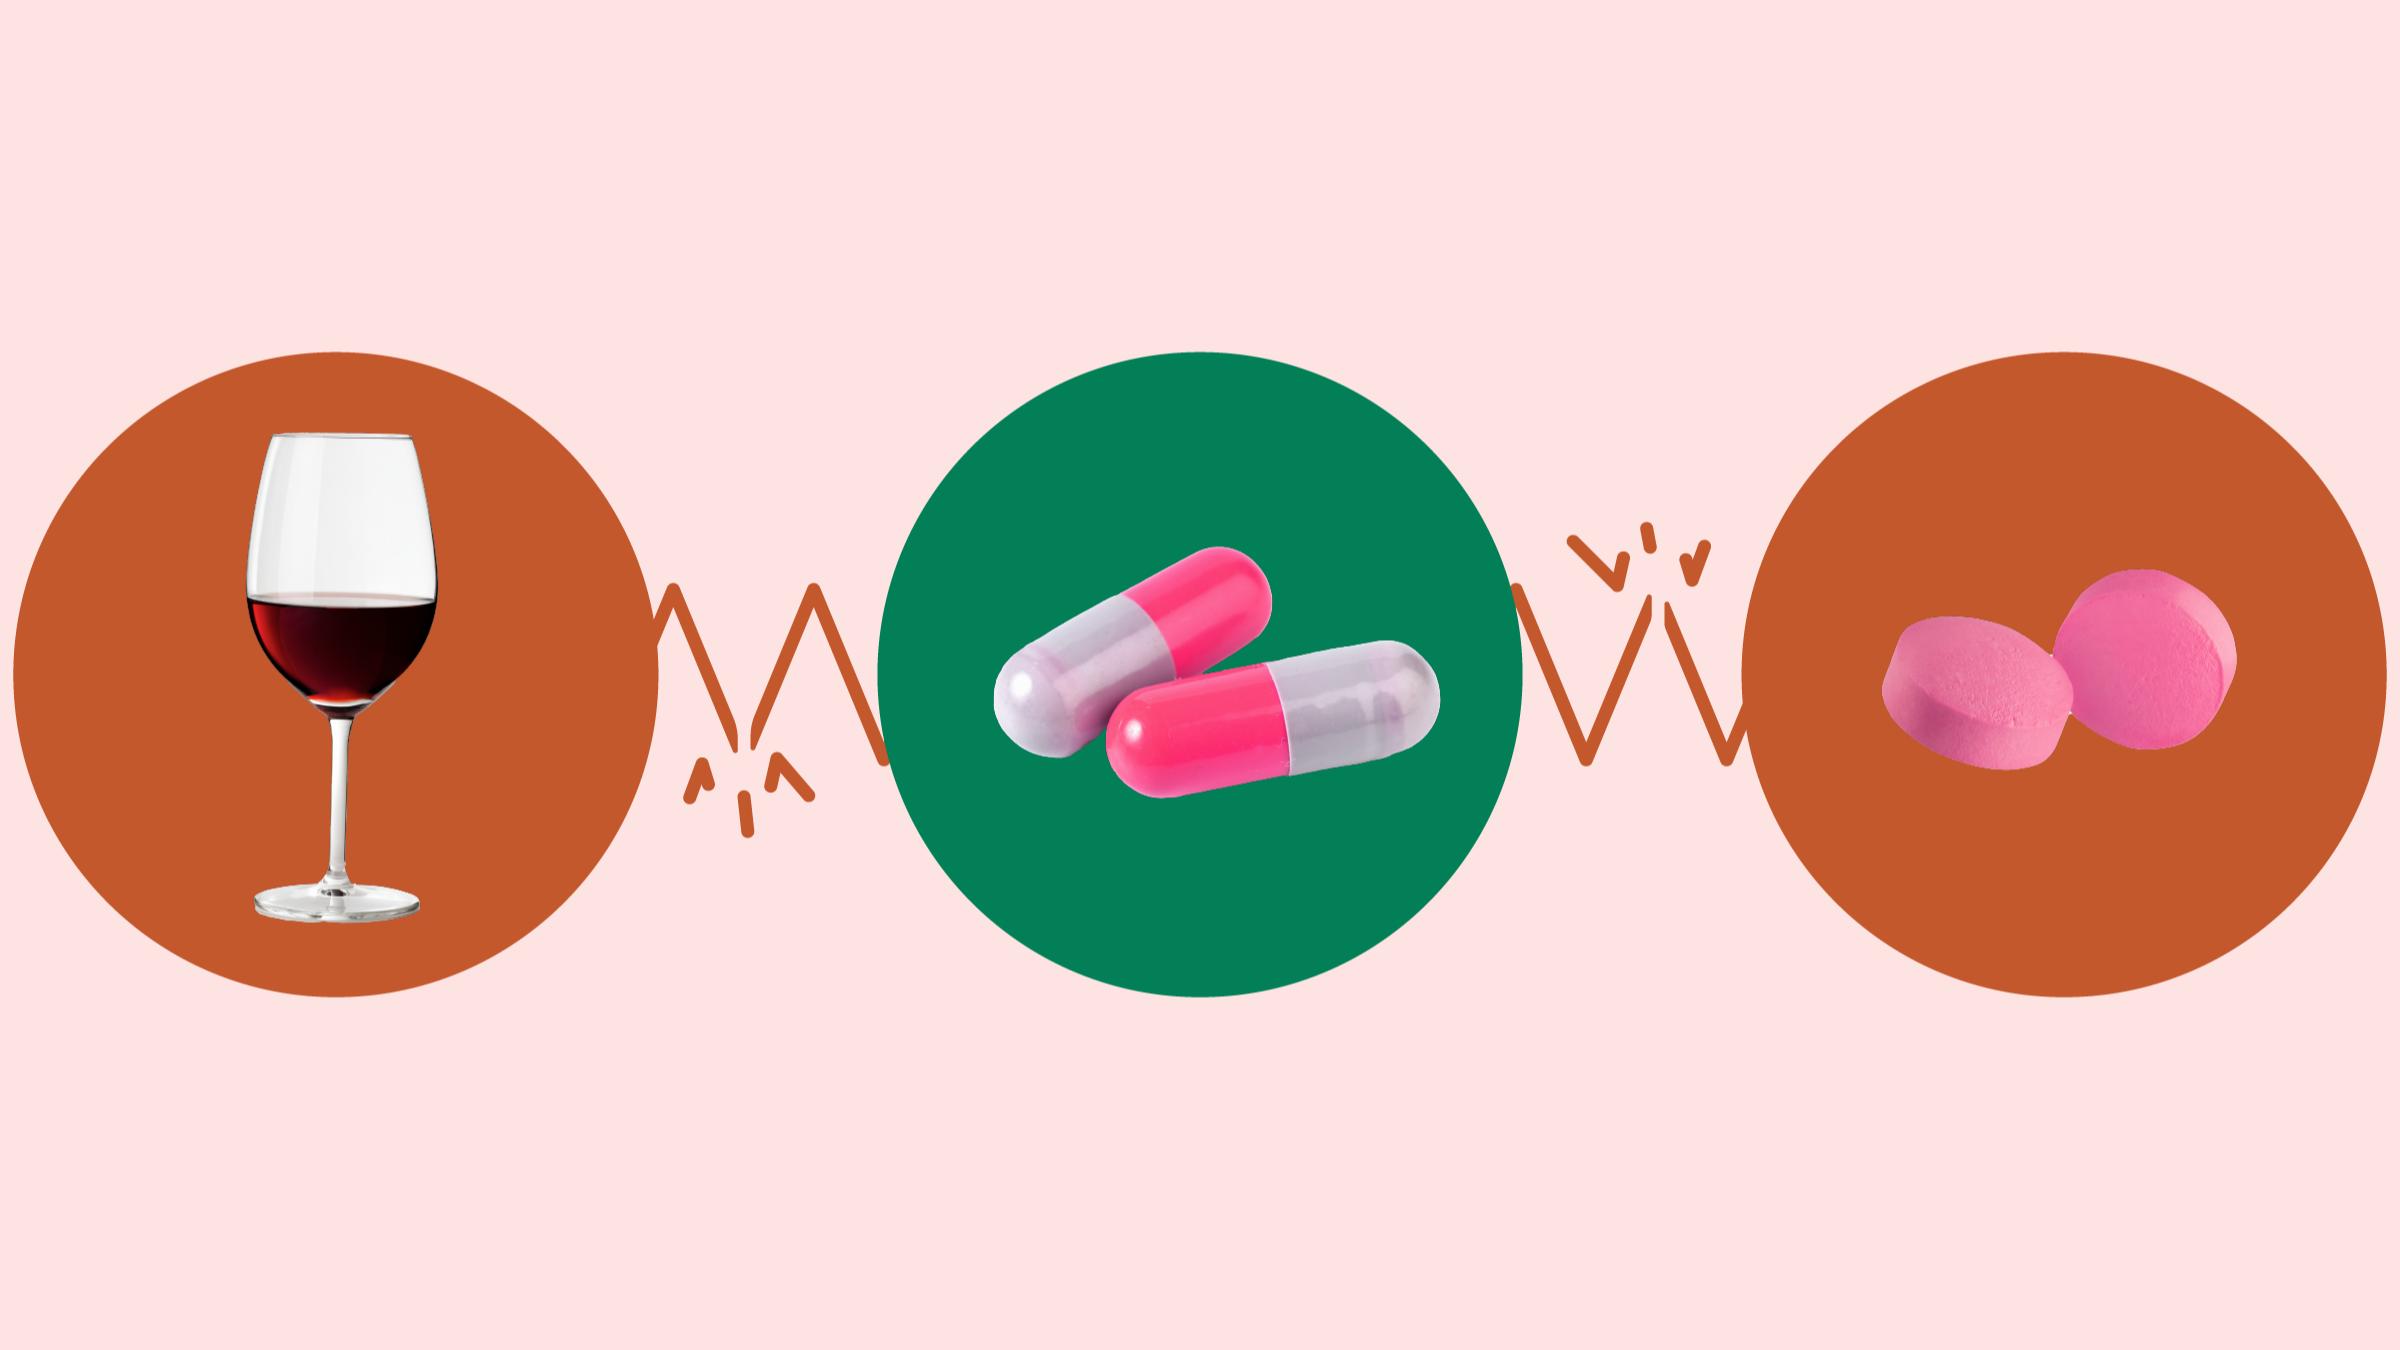 Three circles are in a row on a pink background. The first circle contains a glass of red wine, the second circle contains two pills, and the third circle contains two pills.